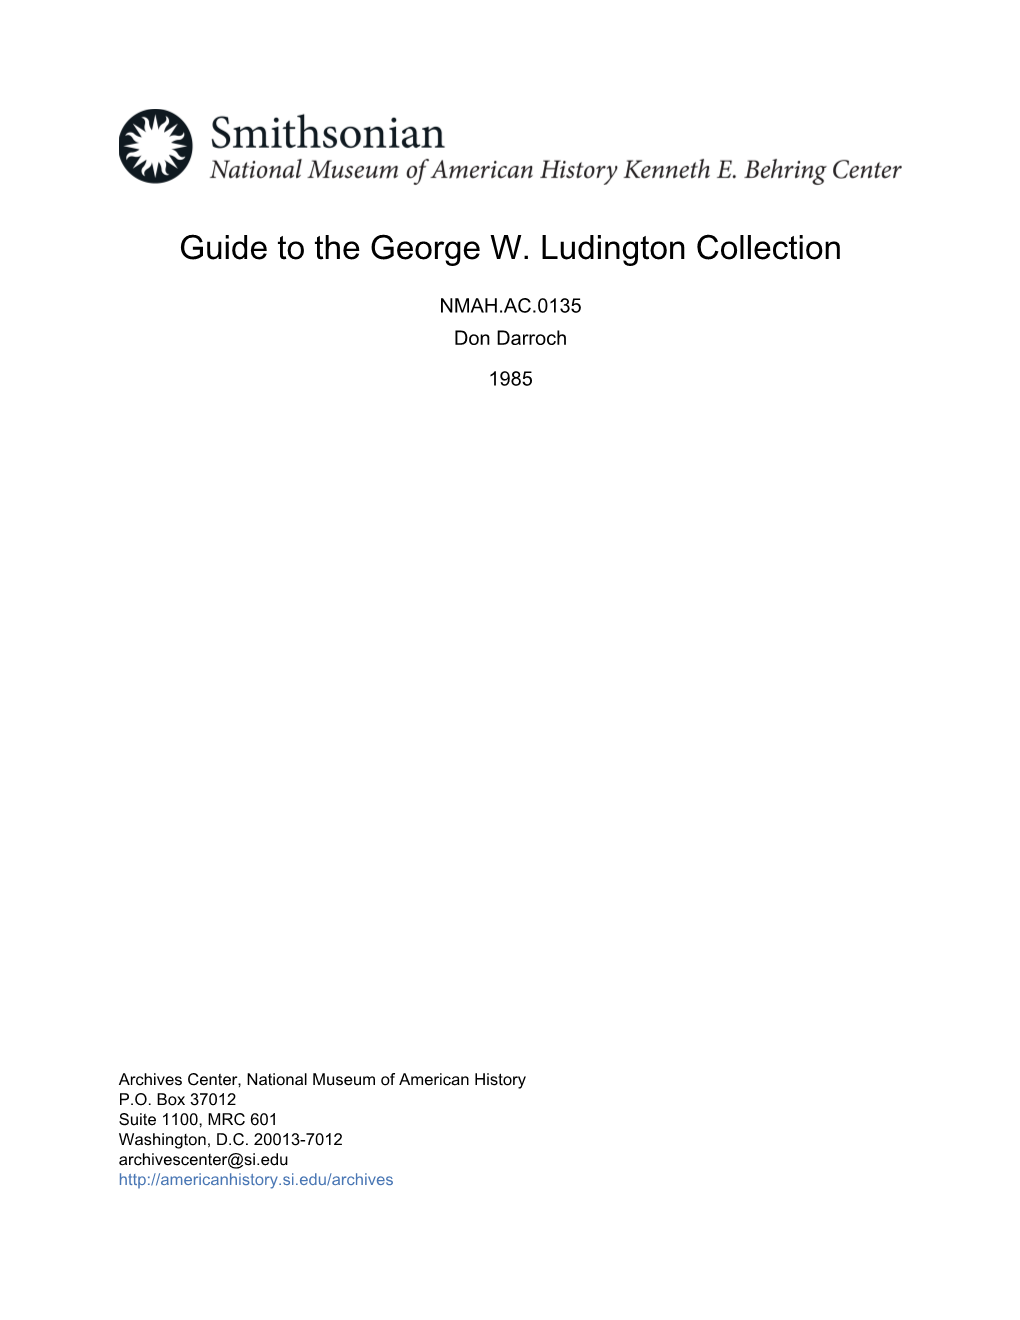 Guide to the George W. Ludington Collection